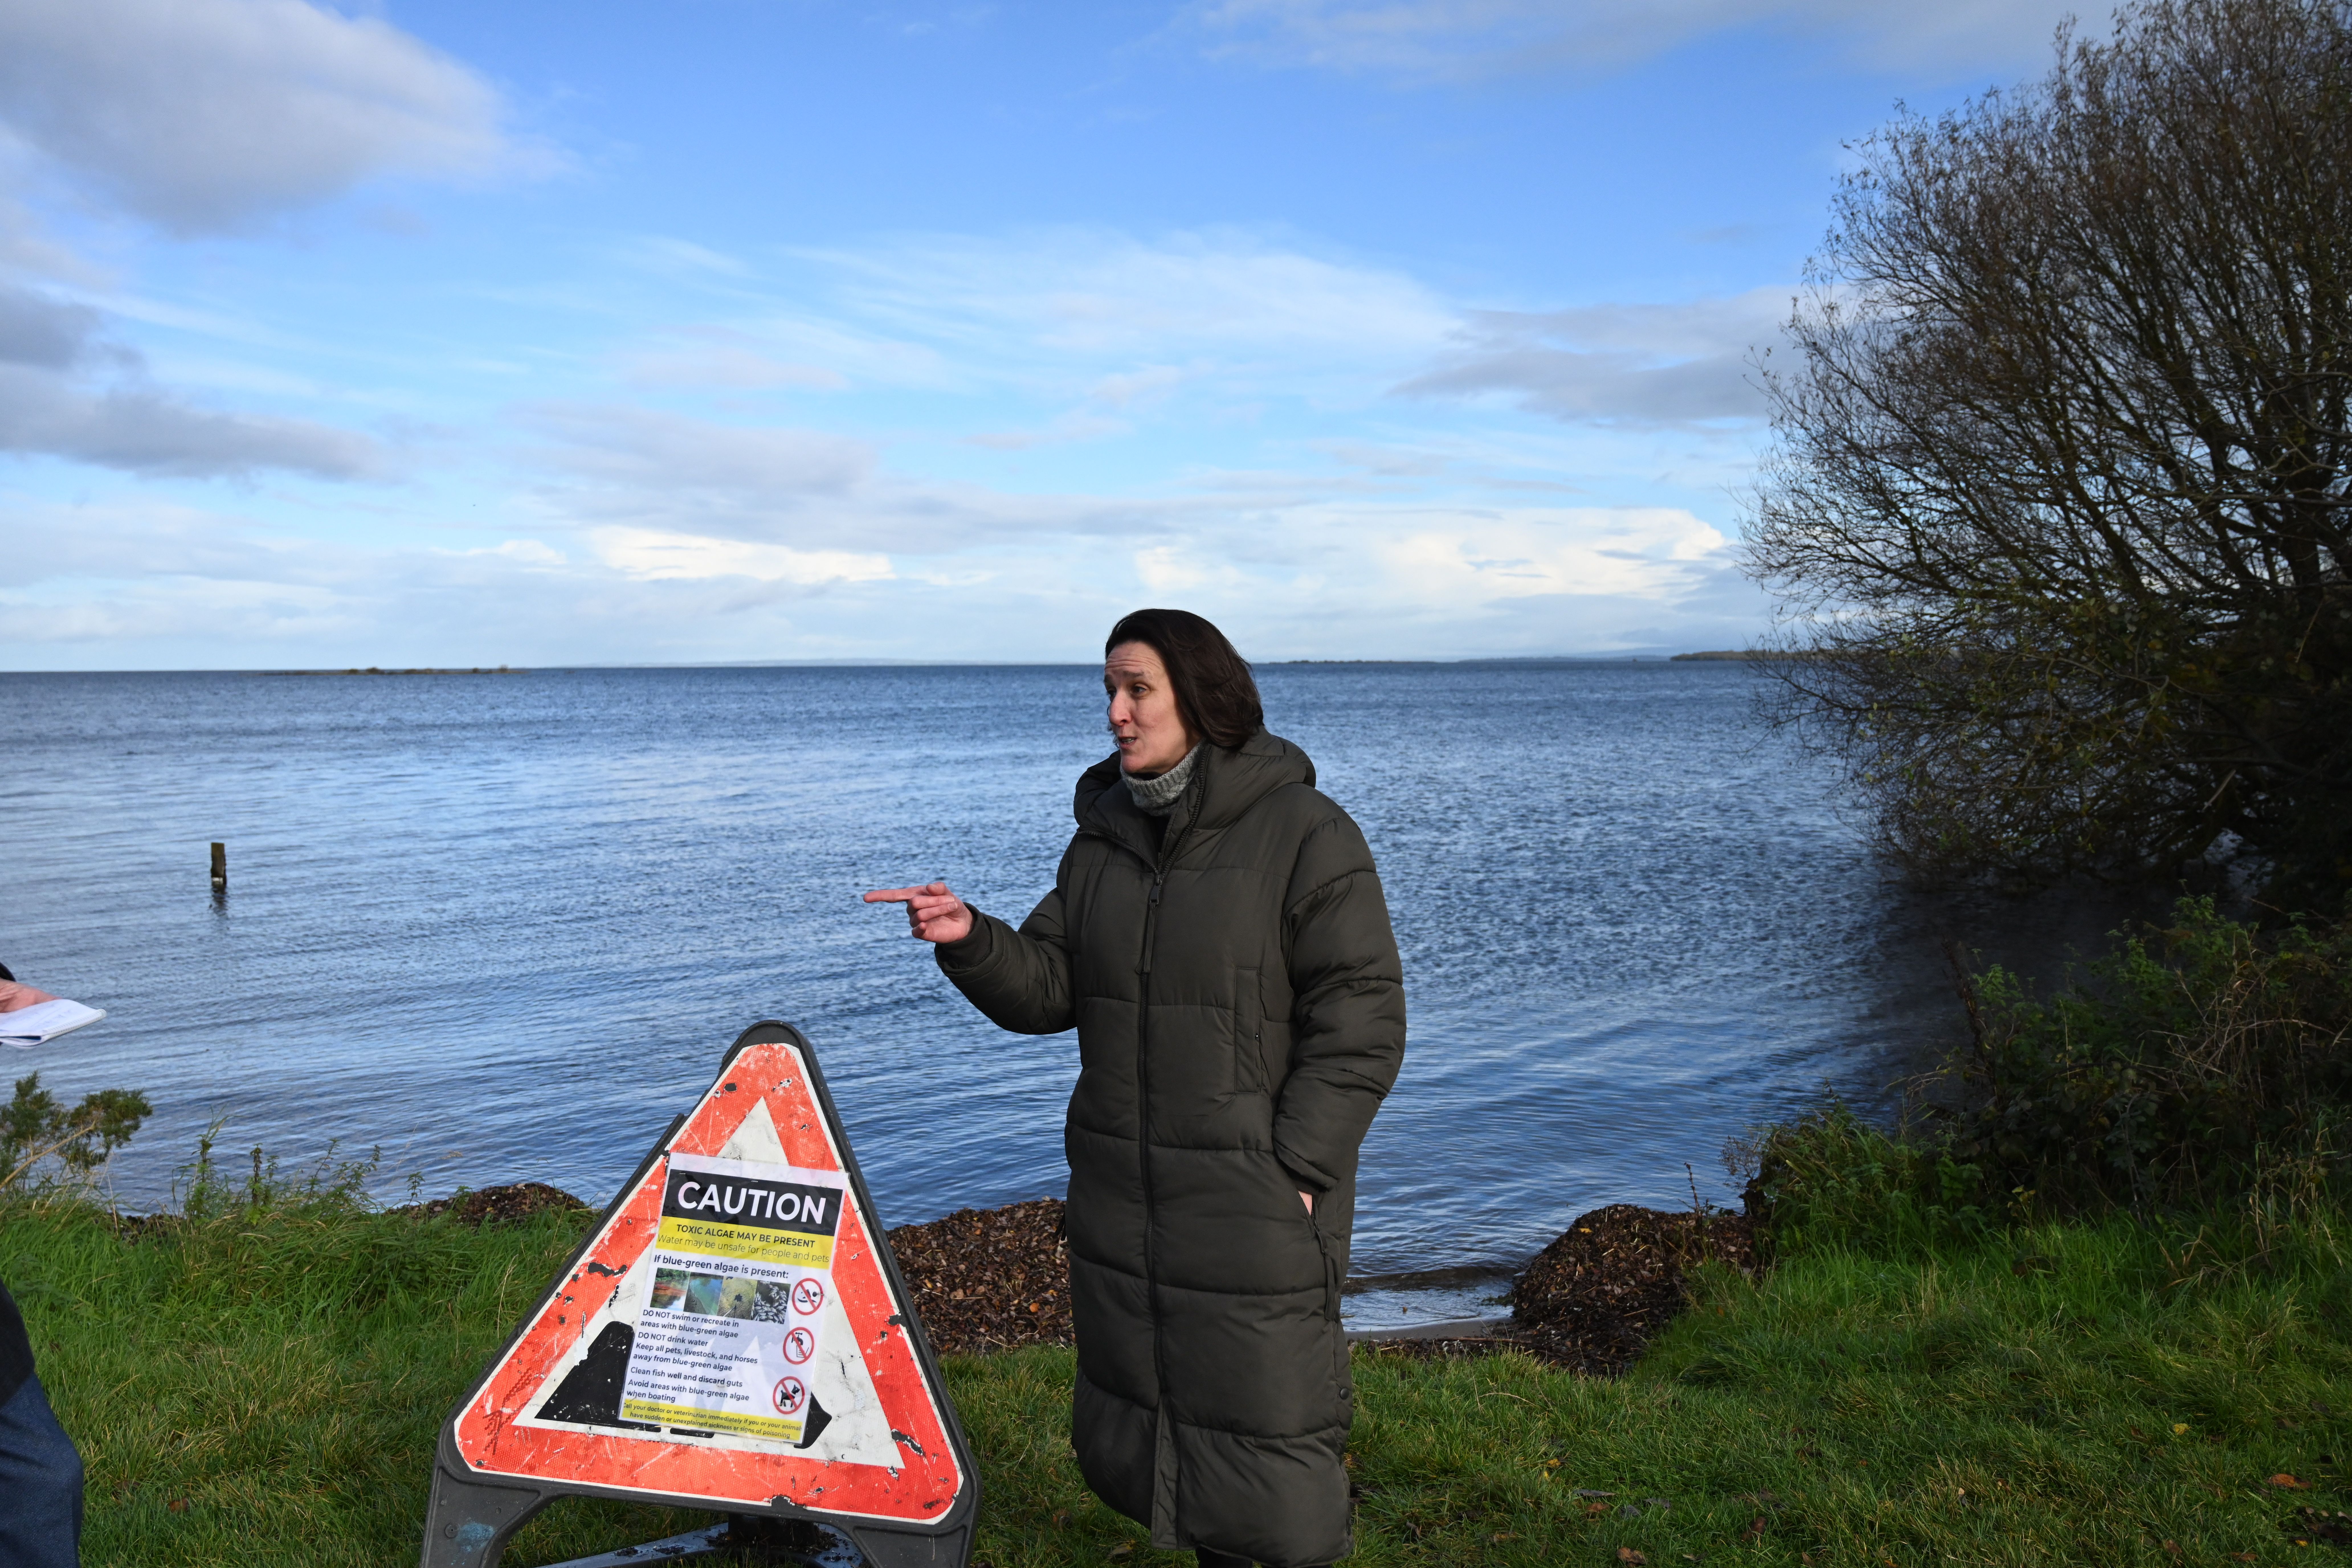 CAMPAIGN: Love Our Lough leader Louise Taylor says abuse of Lough Neagh has become normalised and that needs to be reversed